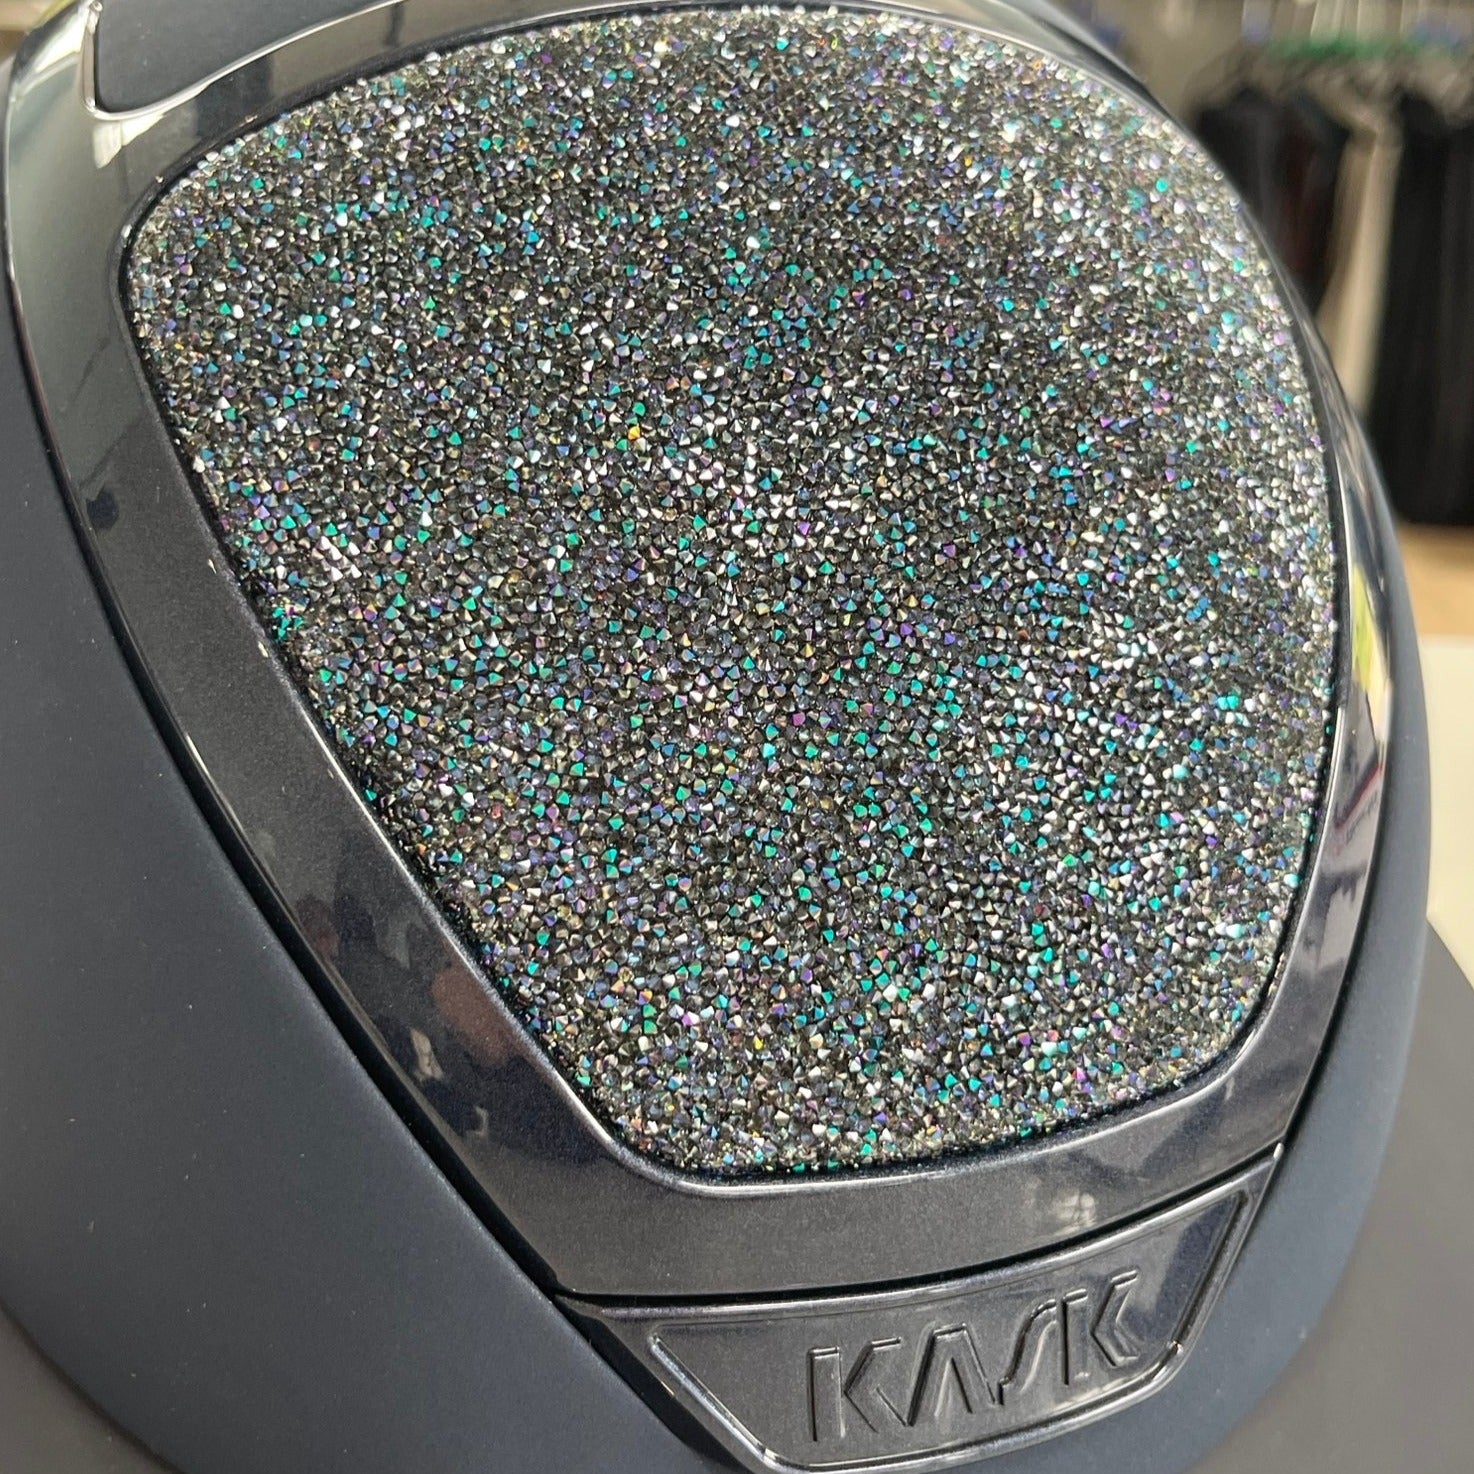 Kask Star Lady Navy/parsh swarovski midnight S- in stock and ready to ship!